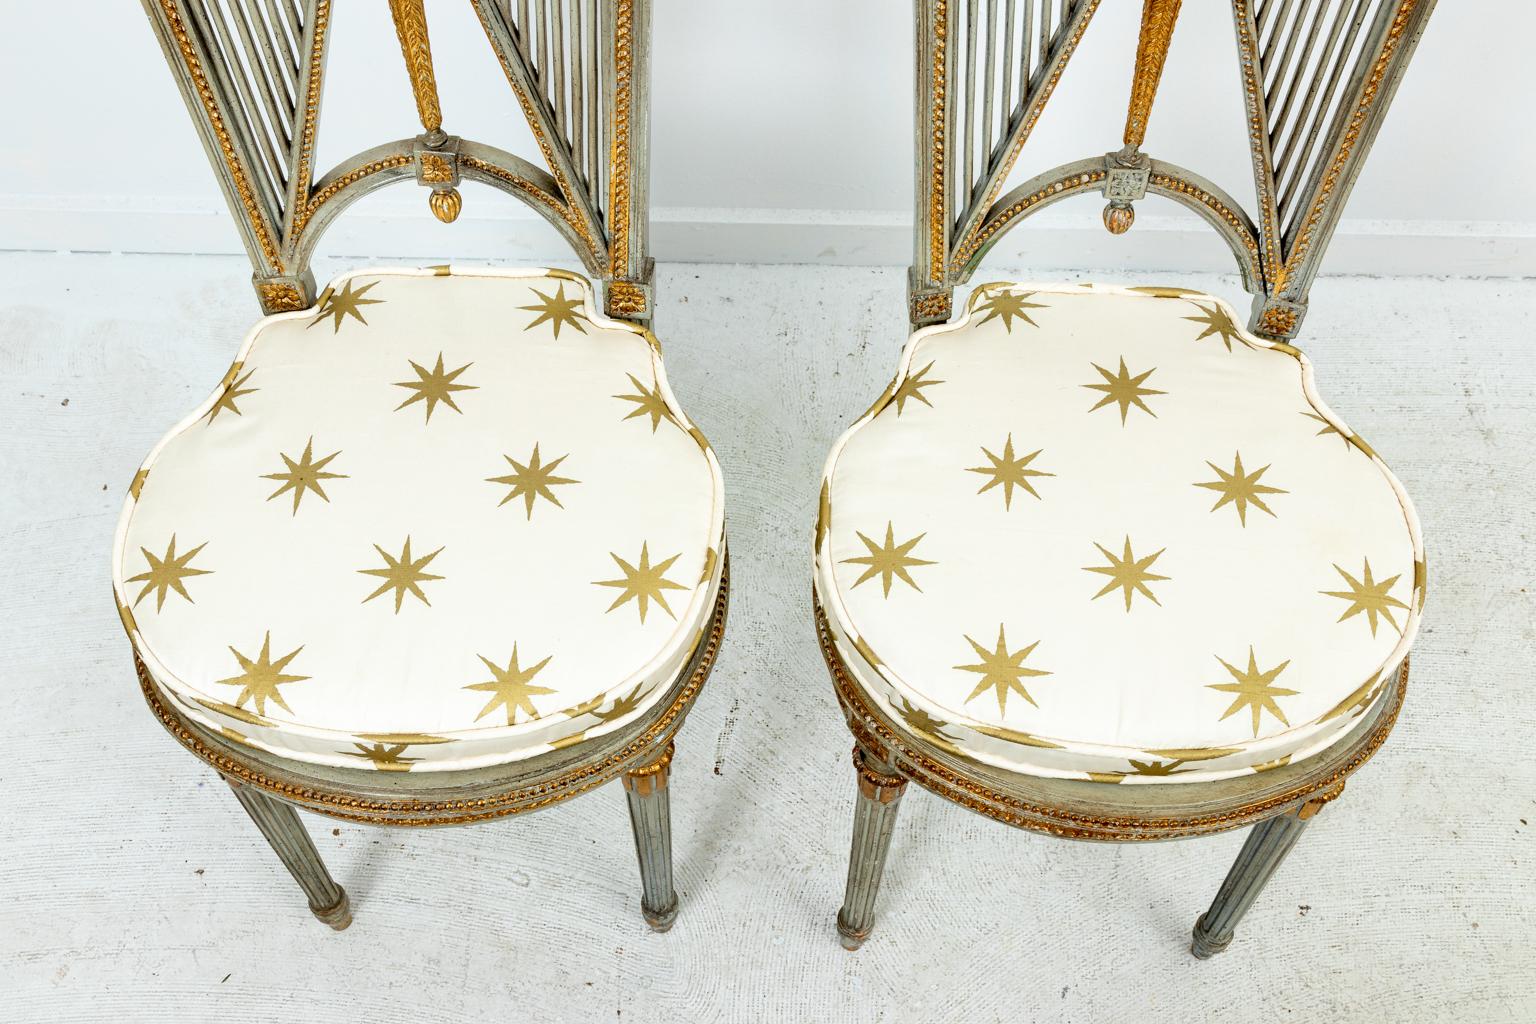 Pair of French painted neoclassical or Empire style side chairs with upholstered starburst seats and gold painted accents. The chairs feature neoclassical motifs such as carved harps on the seat back, rosettes, and beaded trim on the seat base. The